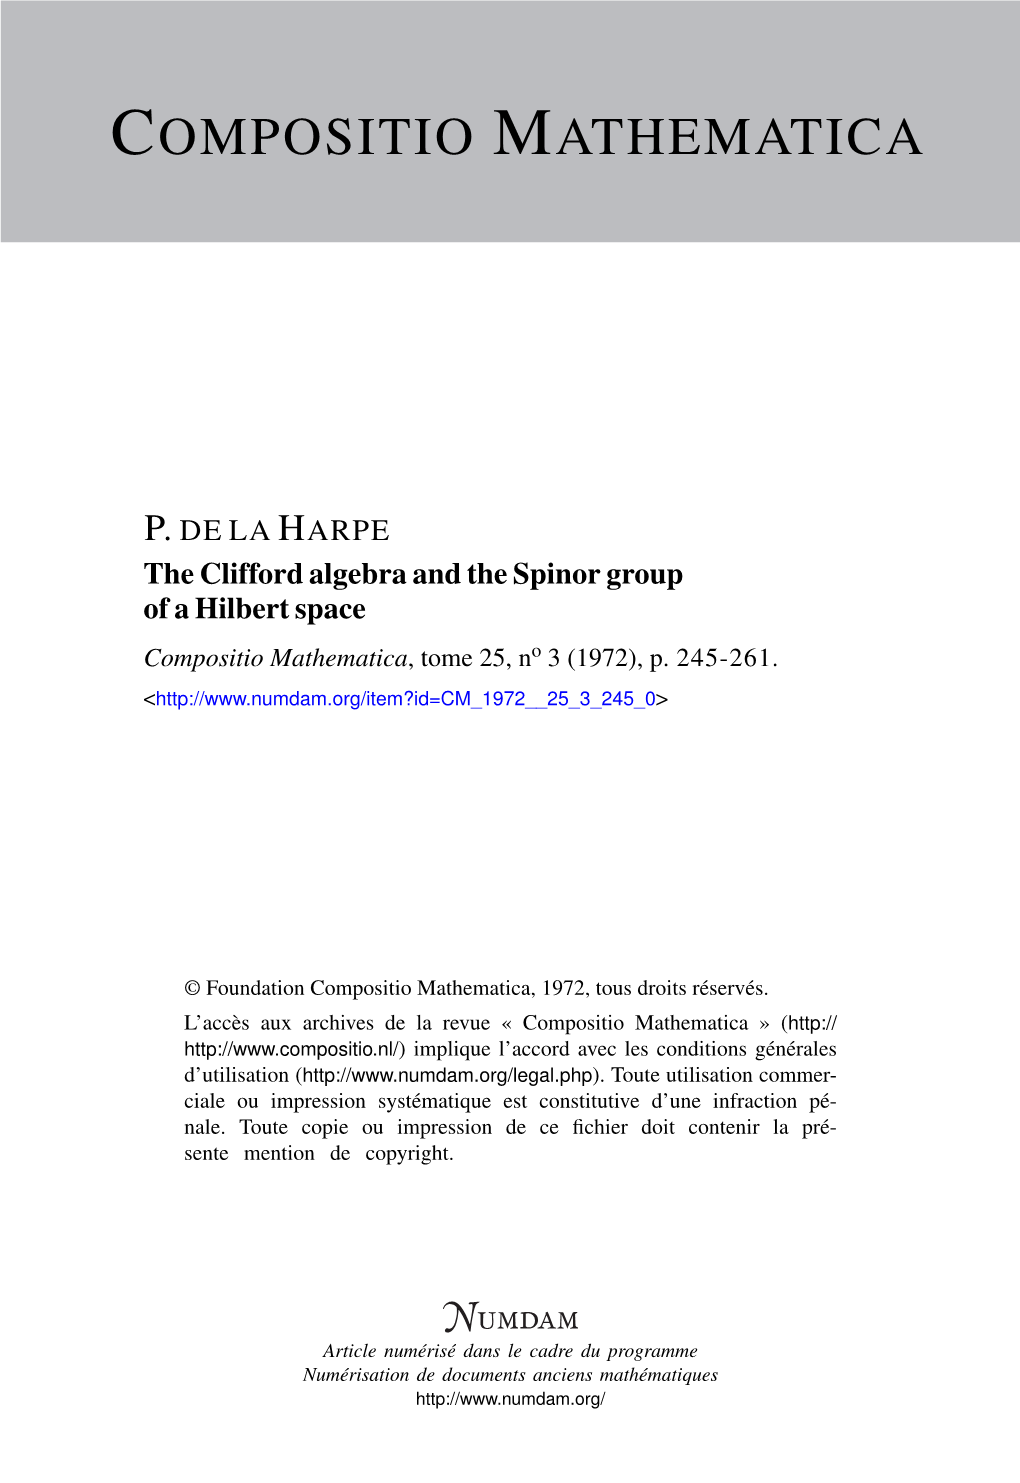 The Clifford Algebra and the Spinor Group of a Hilbert Space Compositio Mathematica, Tome 25, No 3 (1972), P